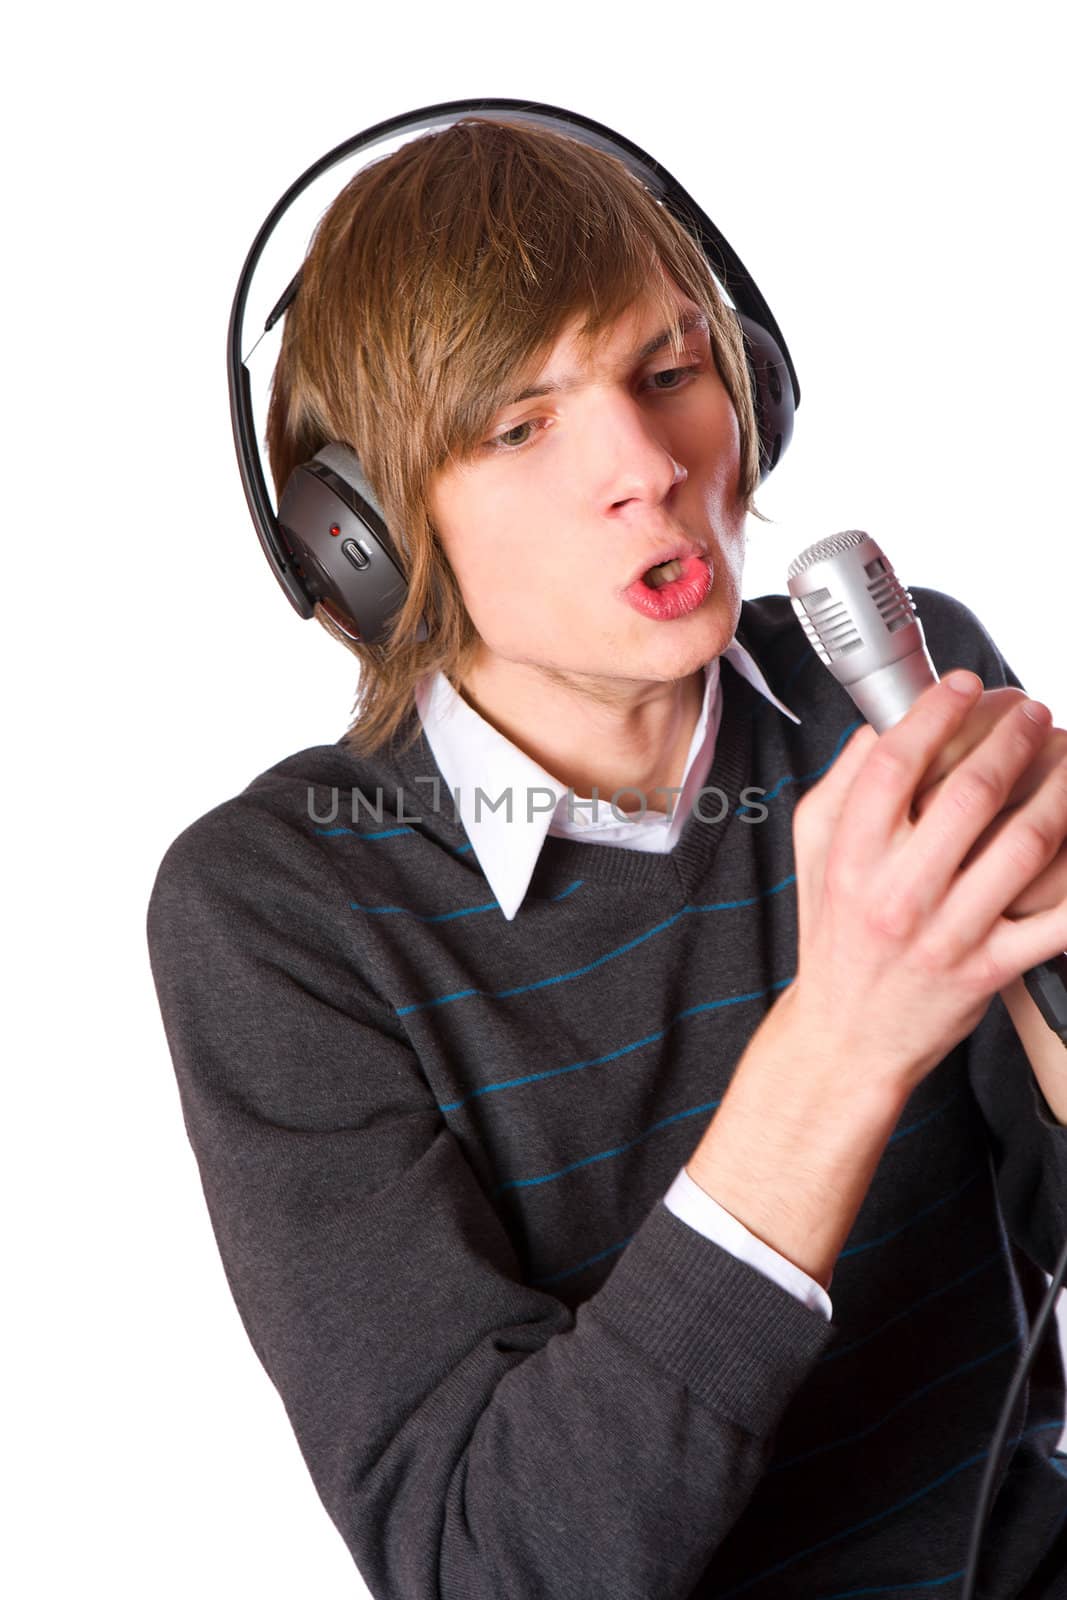 Young man singing wearing headphones isolated on white